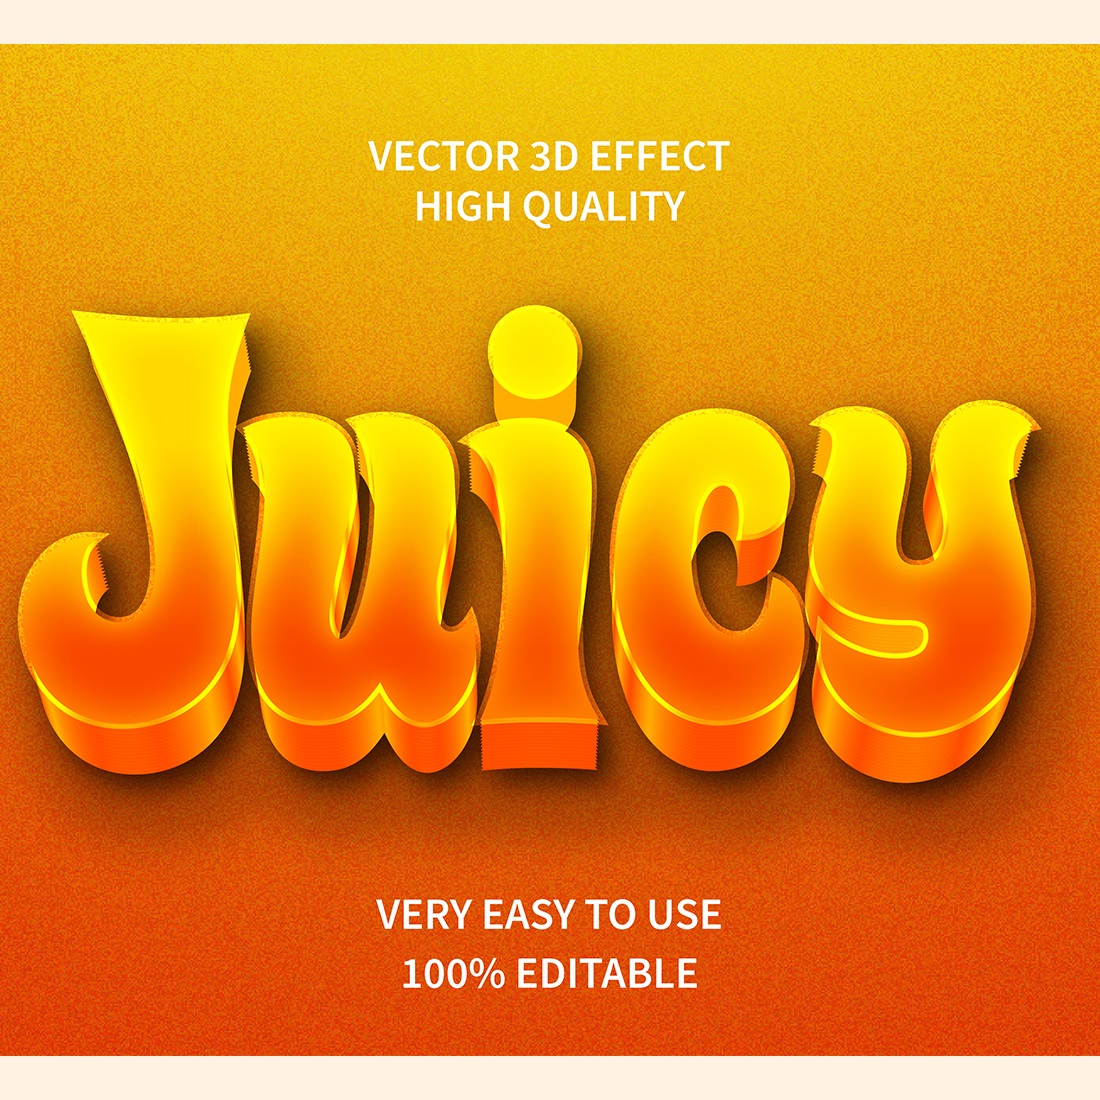 Juicy Editable 3D text Effect Vector cover image.